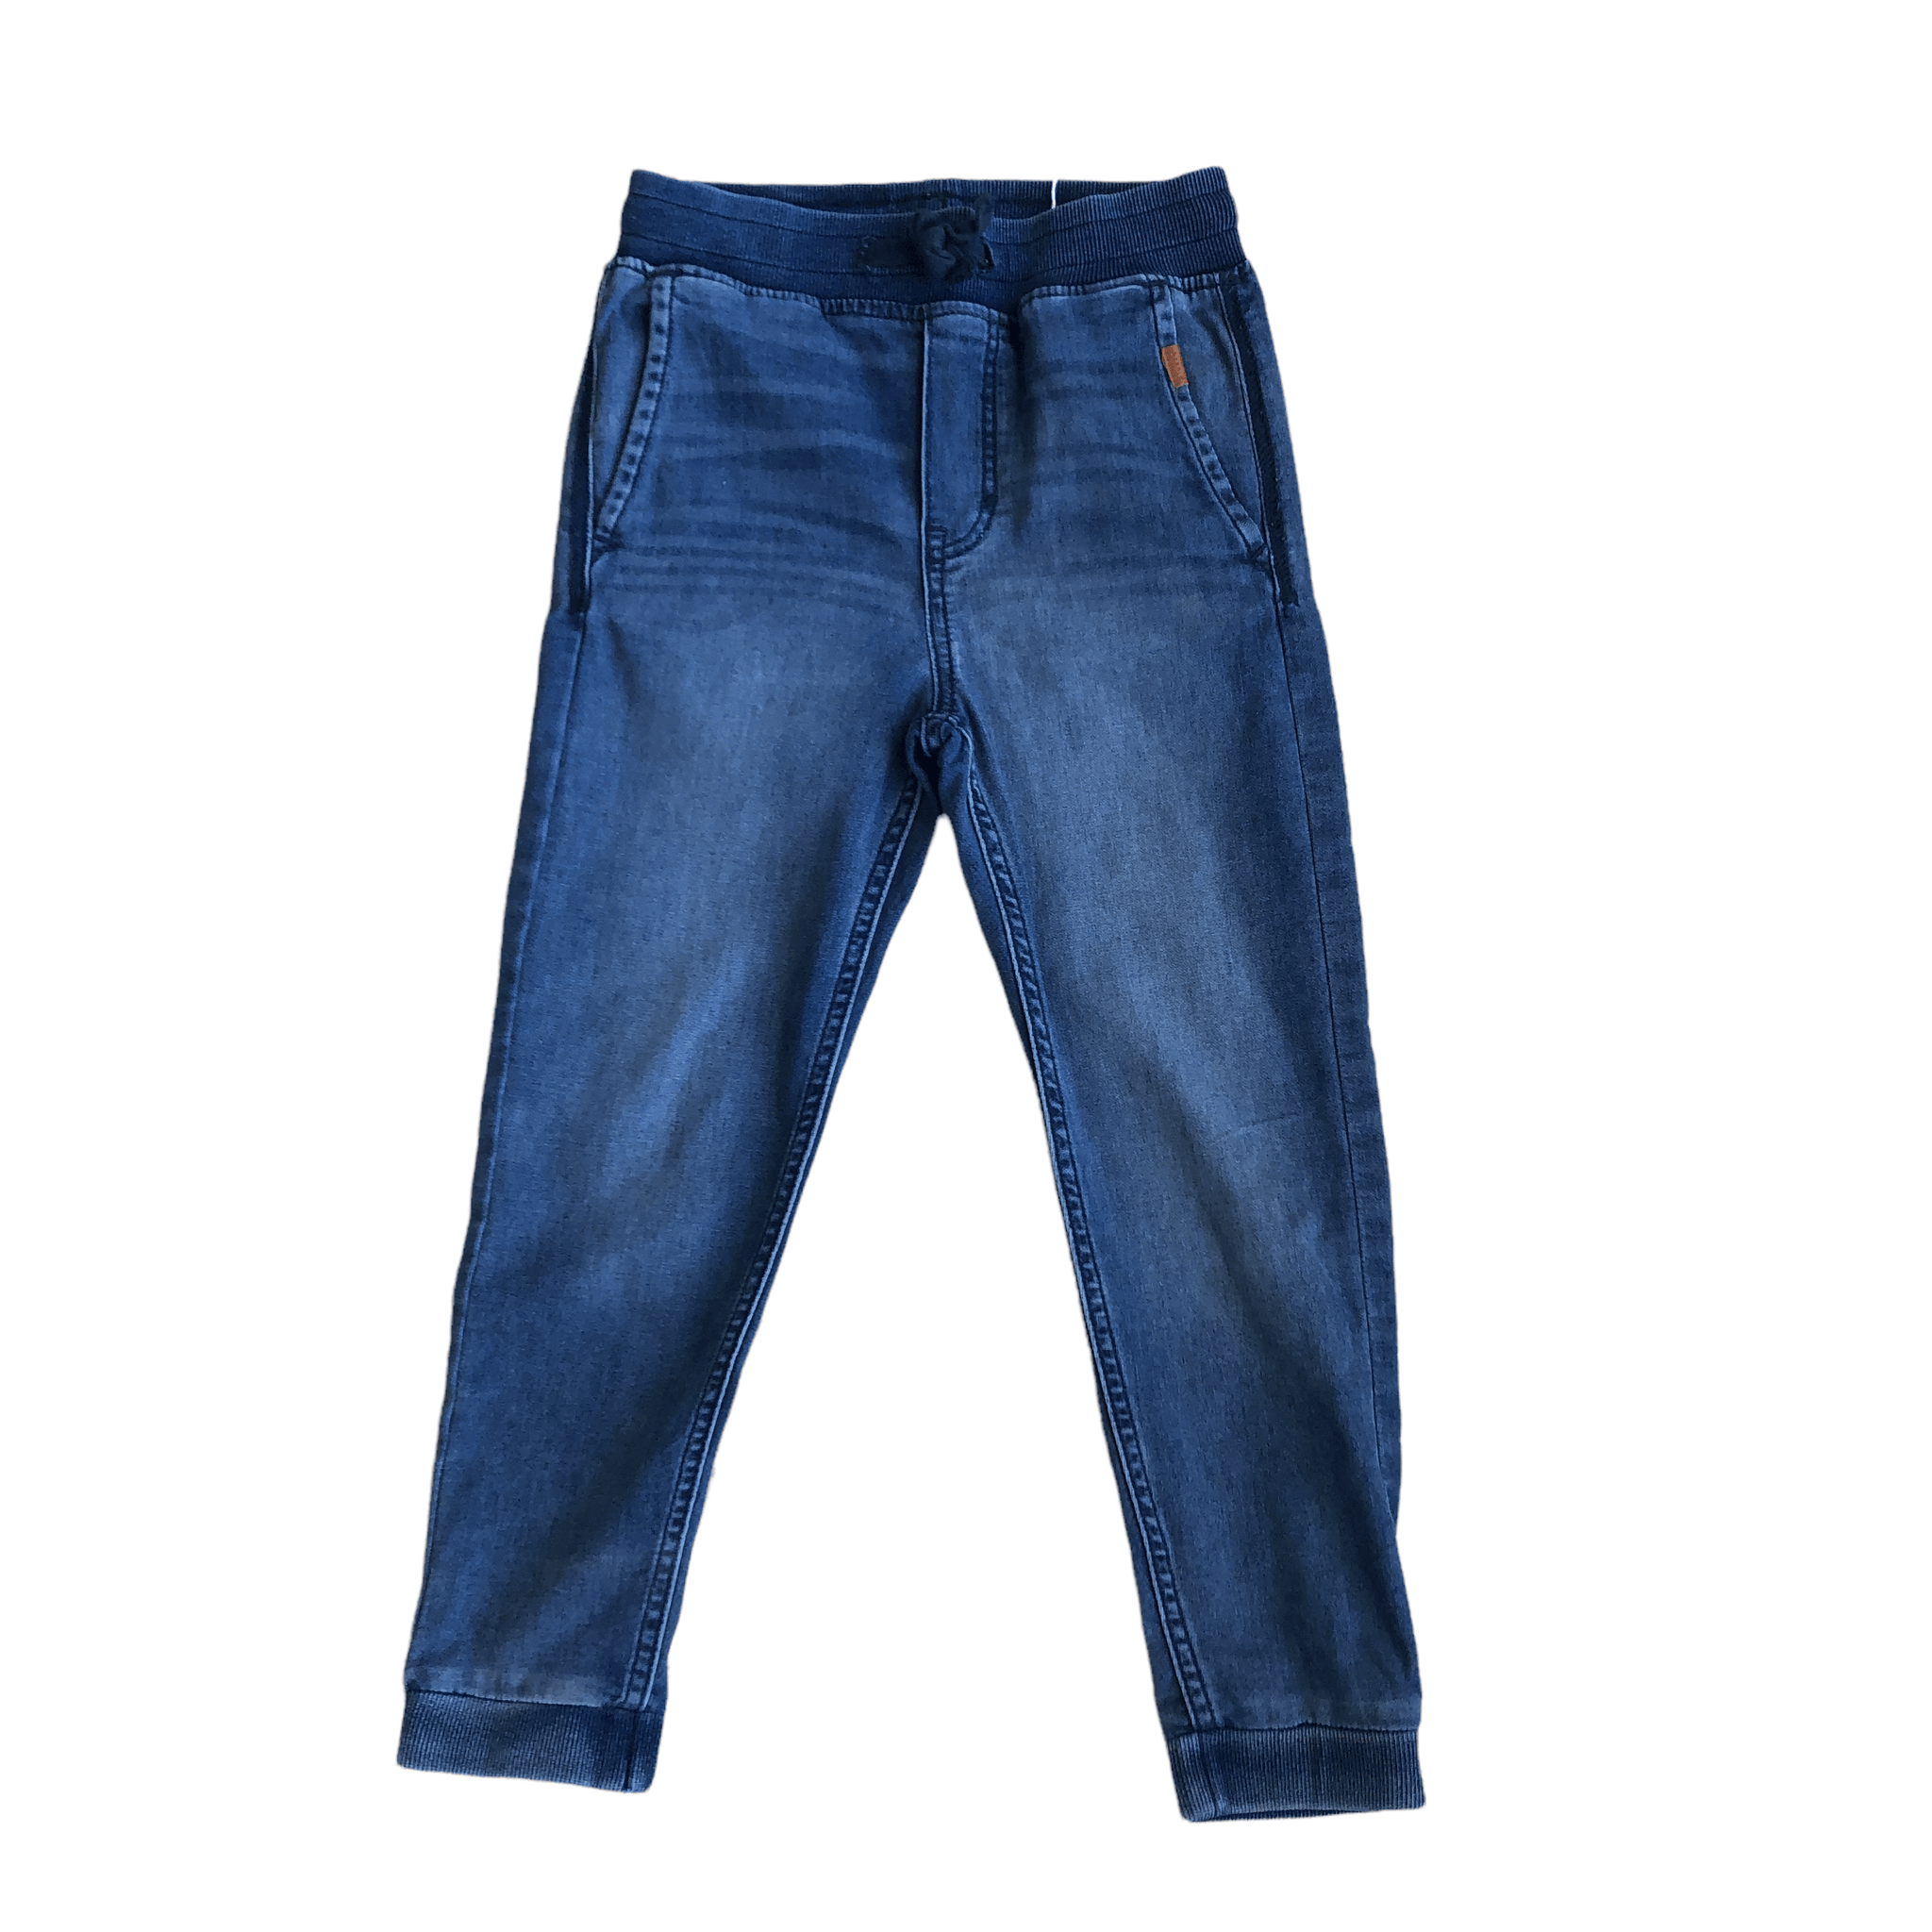 Pre-Owned H&M Super Soft Jogger Jeans (Age 8-9) The Re-Generation